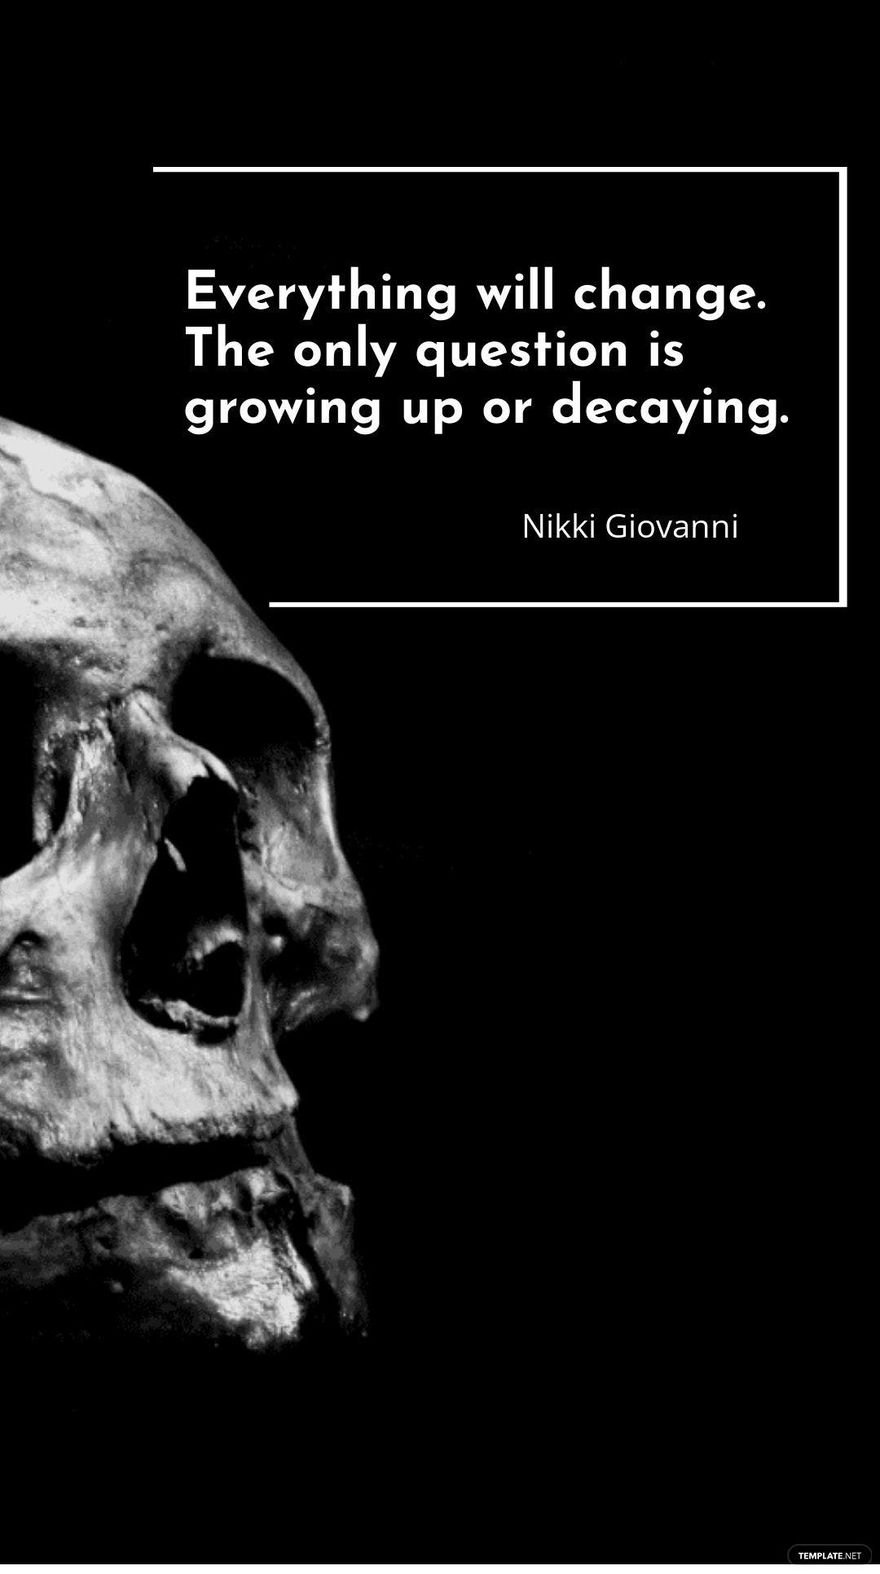 Free Nikki Giovanni - Everything will change. The only question is growing up or decaying.